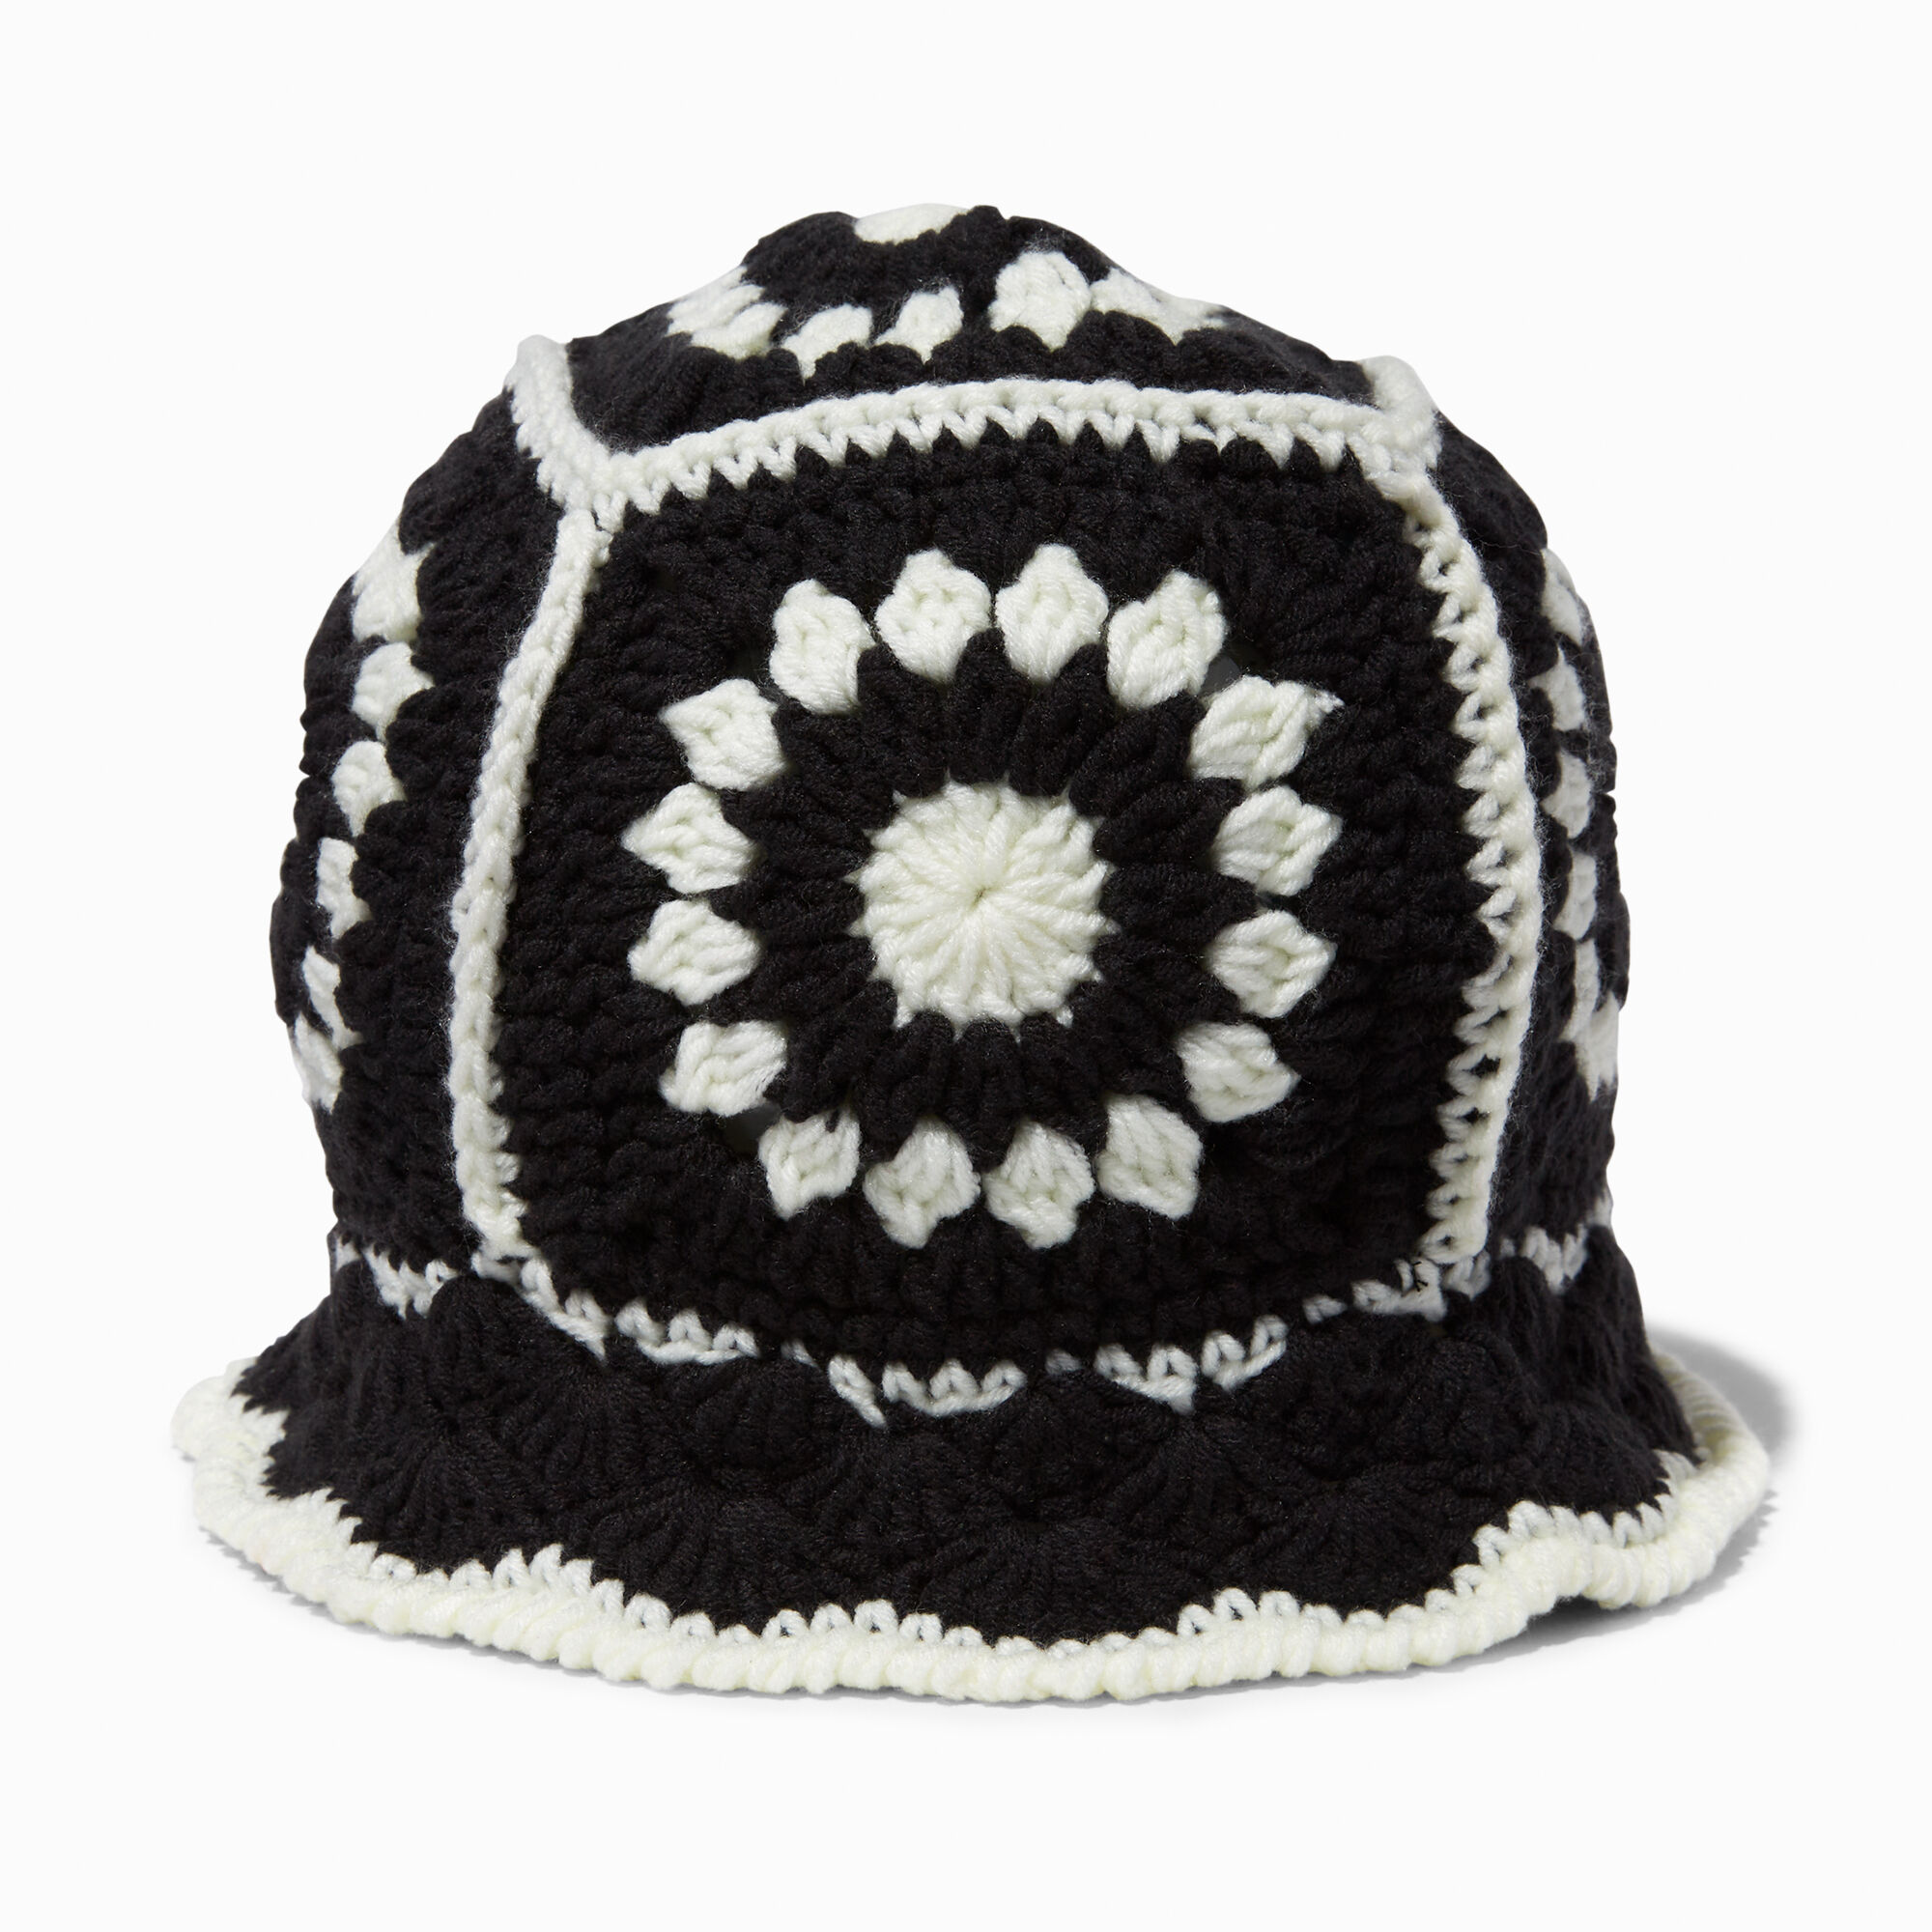 View Claires Black Floral Crochet Bucket Hat White information